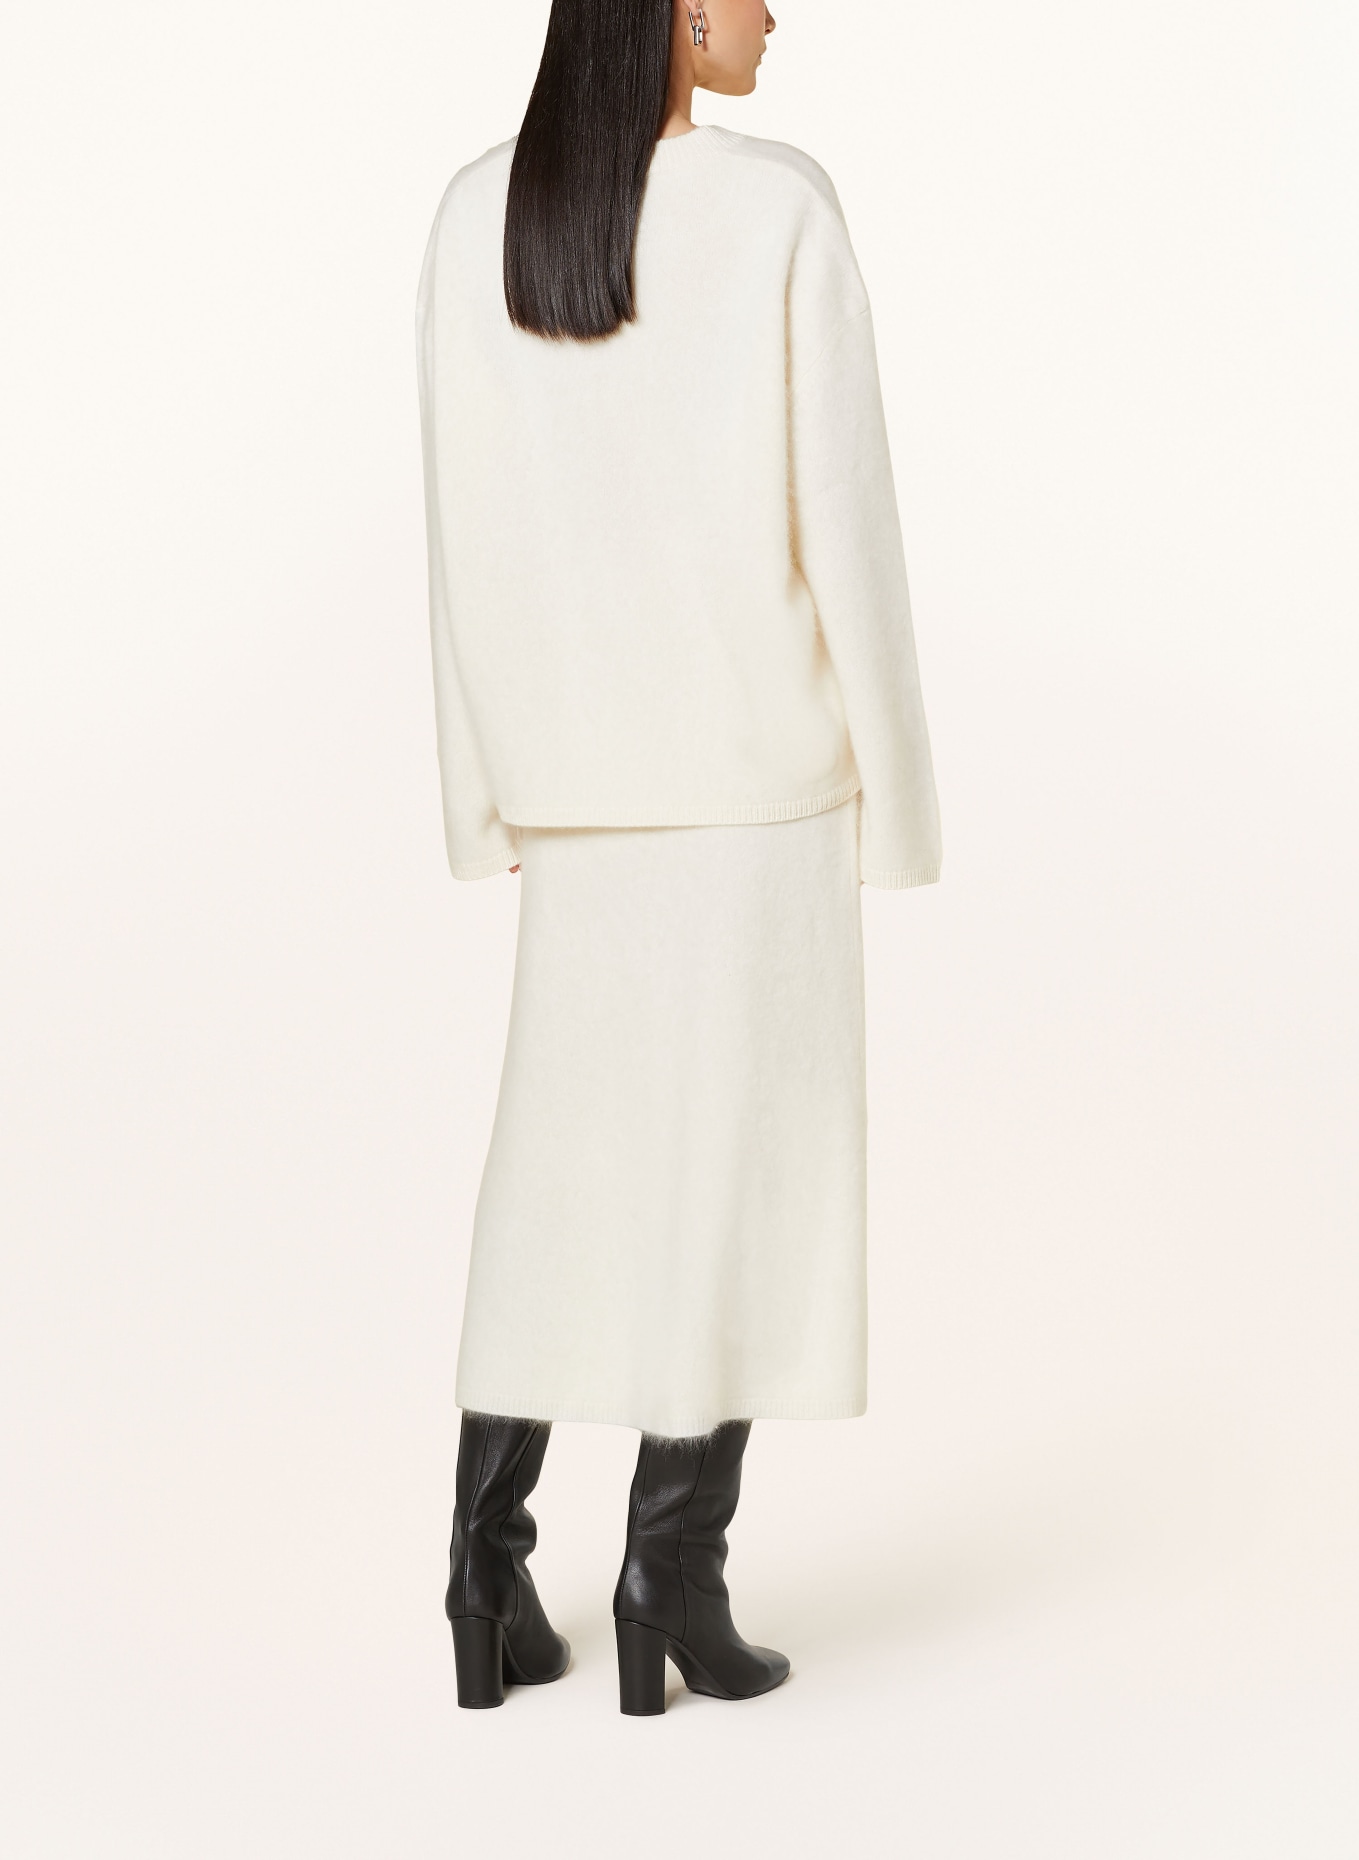 LISA YANG Knit skirt in cashmere, Color: CREAM (Image 3)